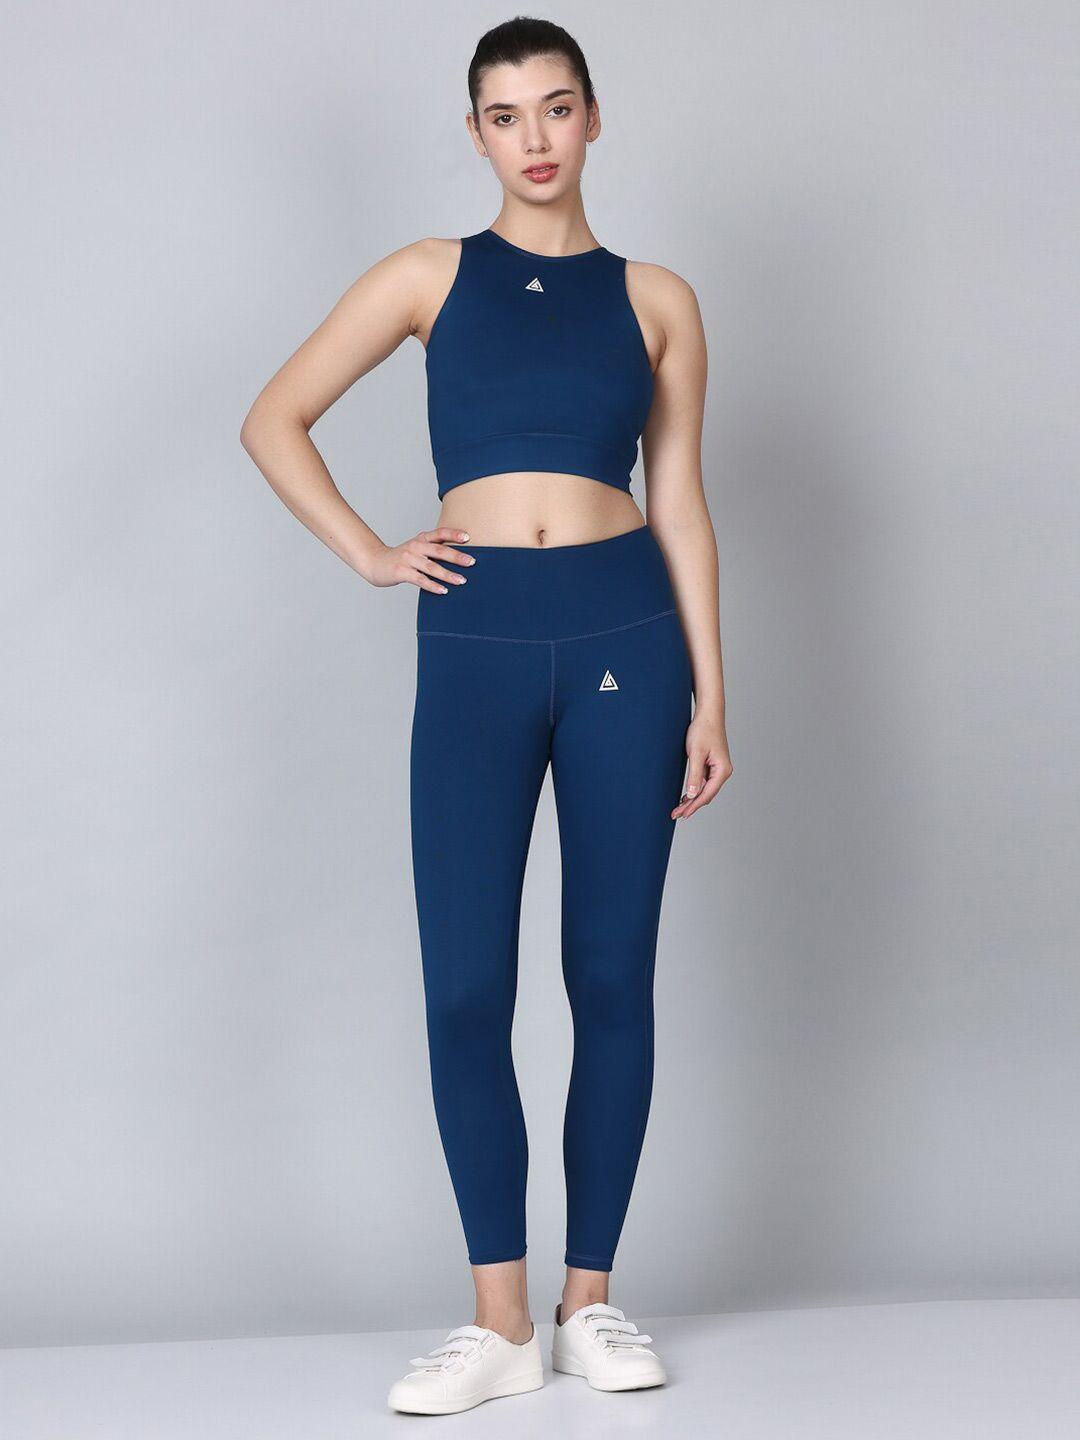 aesthetic bodies sleeveless crop top with stretchable leggings